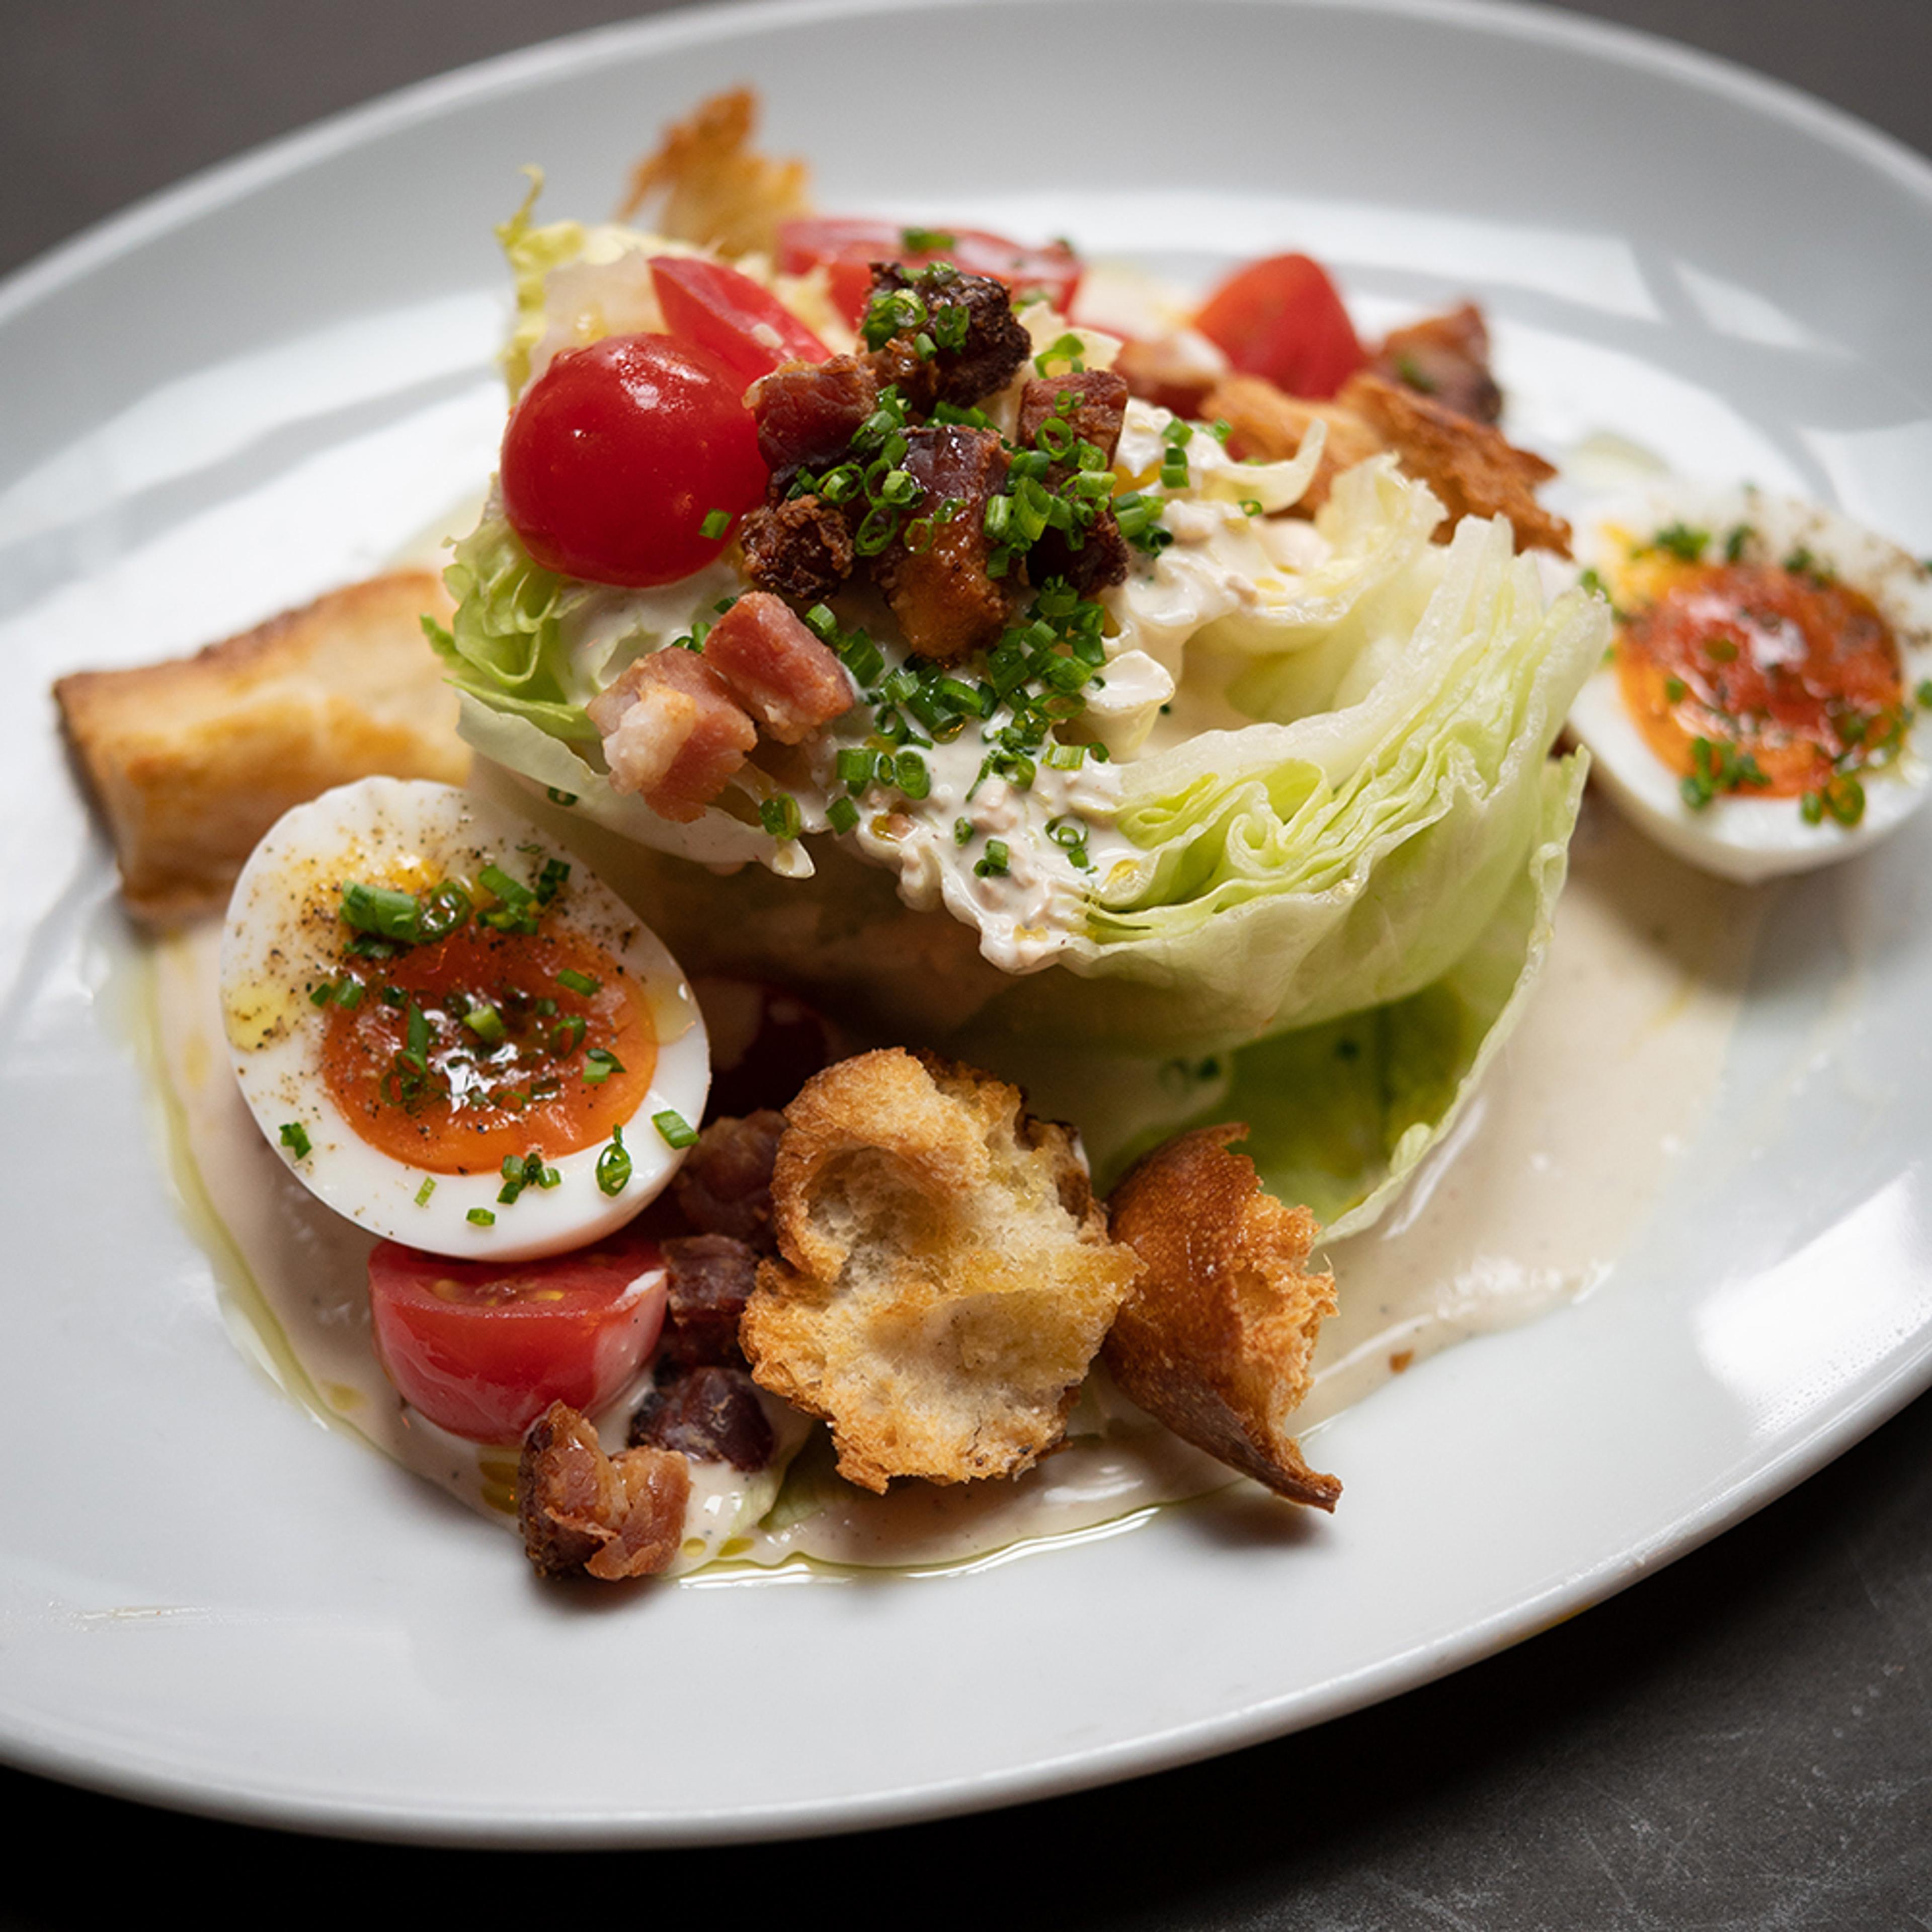 Wedge salad with soft boiled eggs, hand-torn croutons, bacon and cherry tomatoes